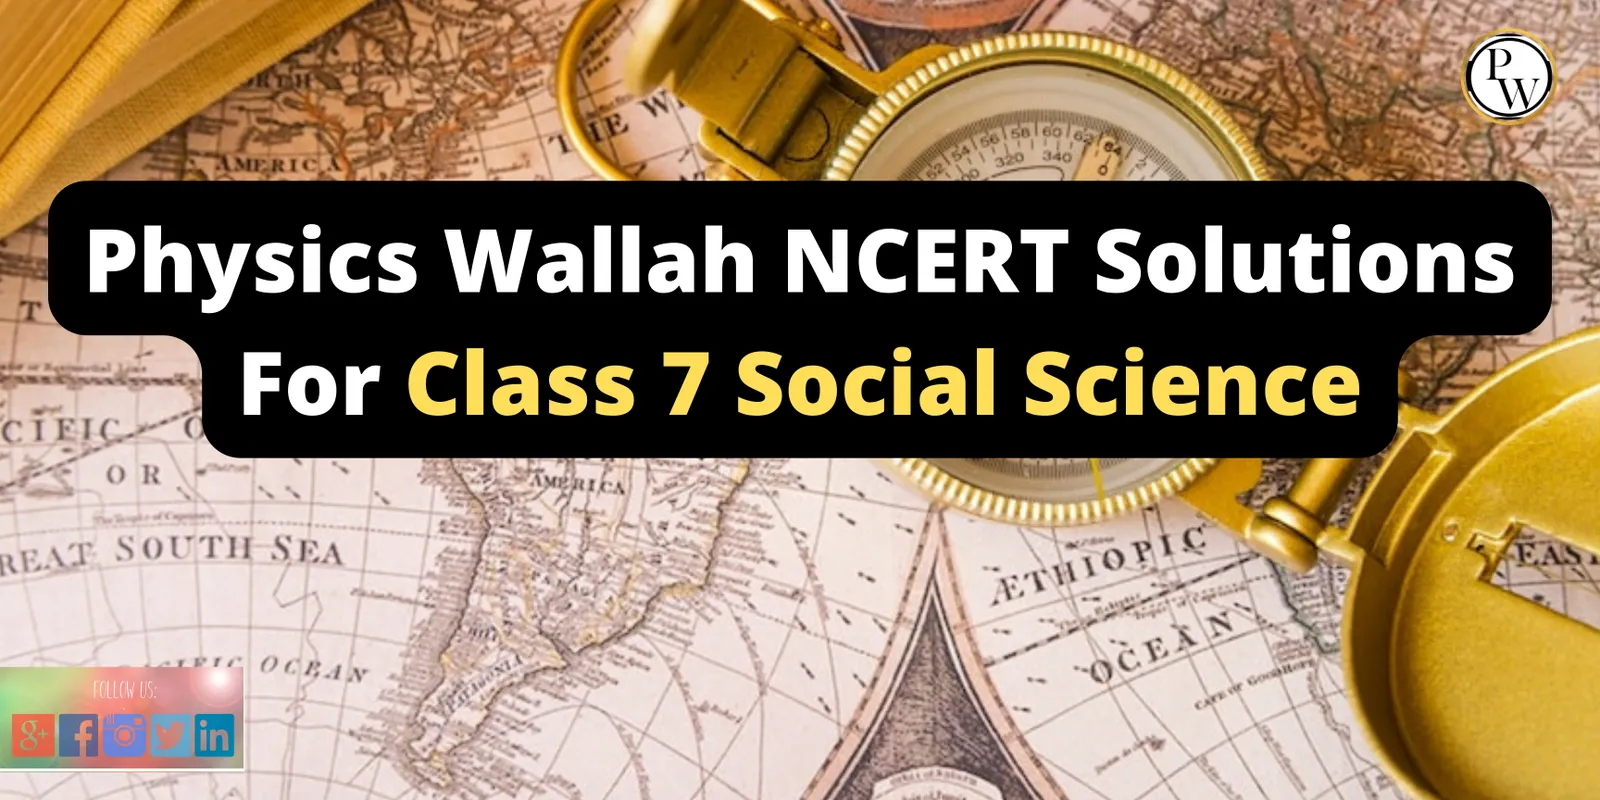   Physics Wallah NCERT Solutions For Class 7 Social Science